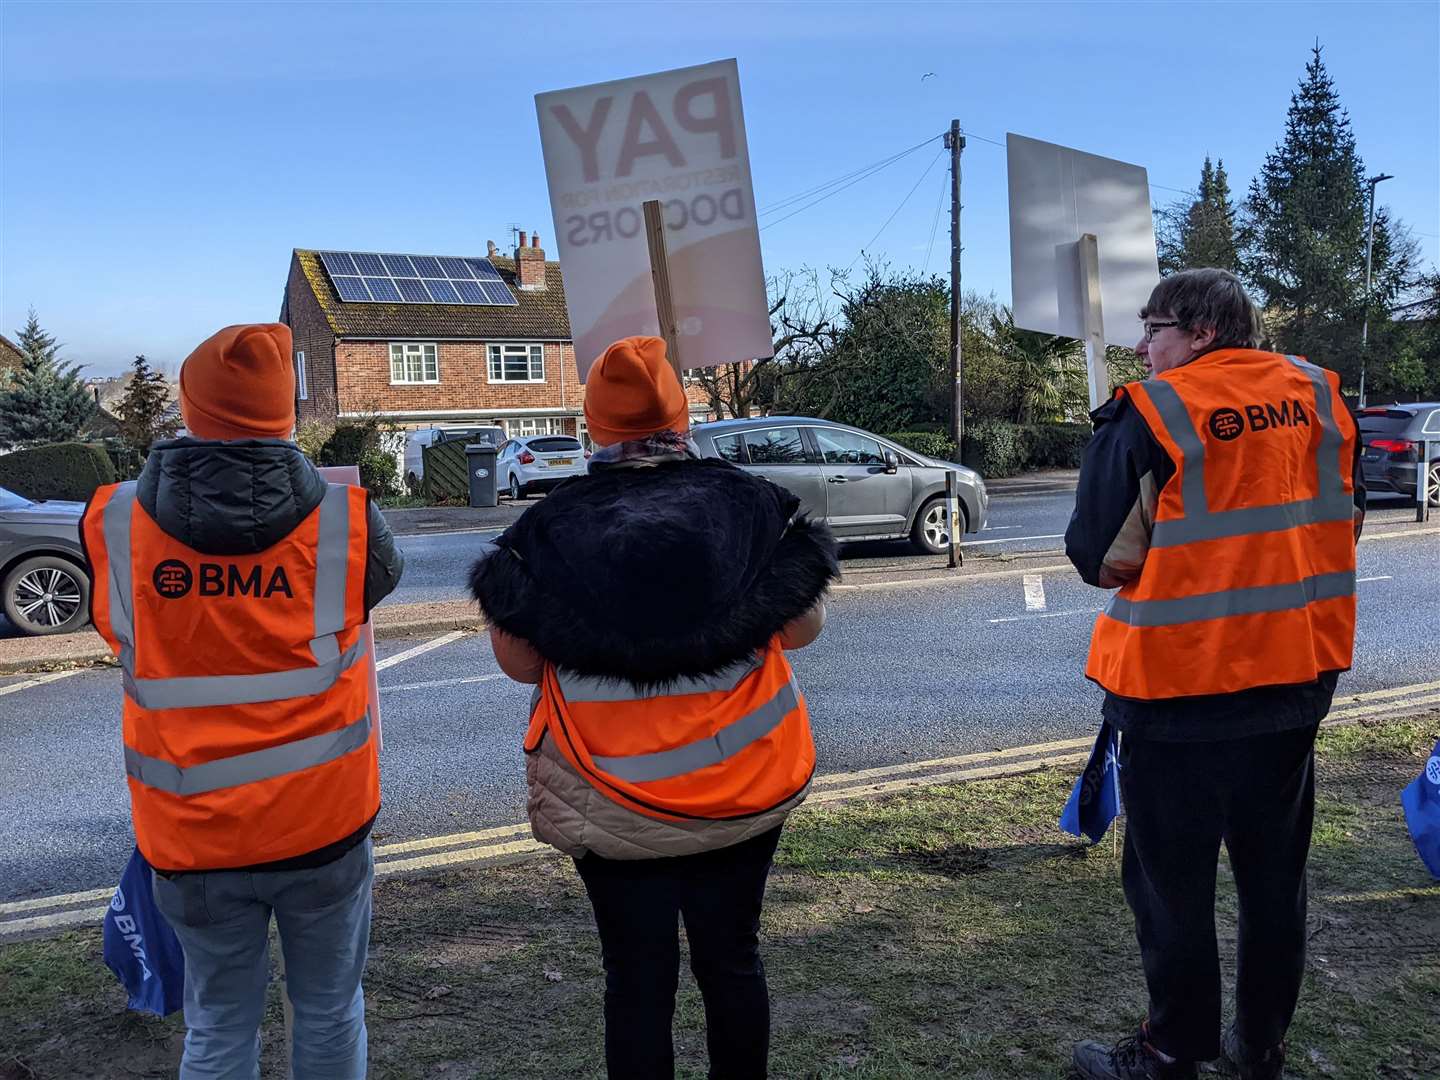 Junior doctors on the picket line in Suffolk. Picture: Suzanne Day